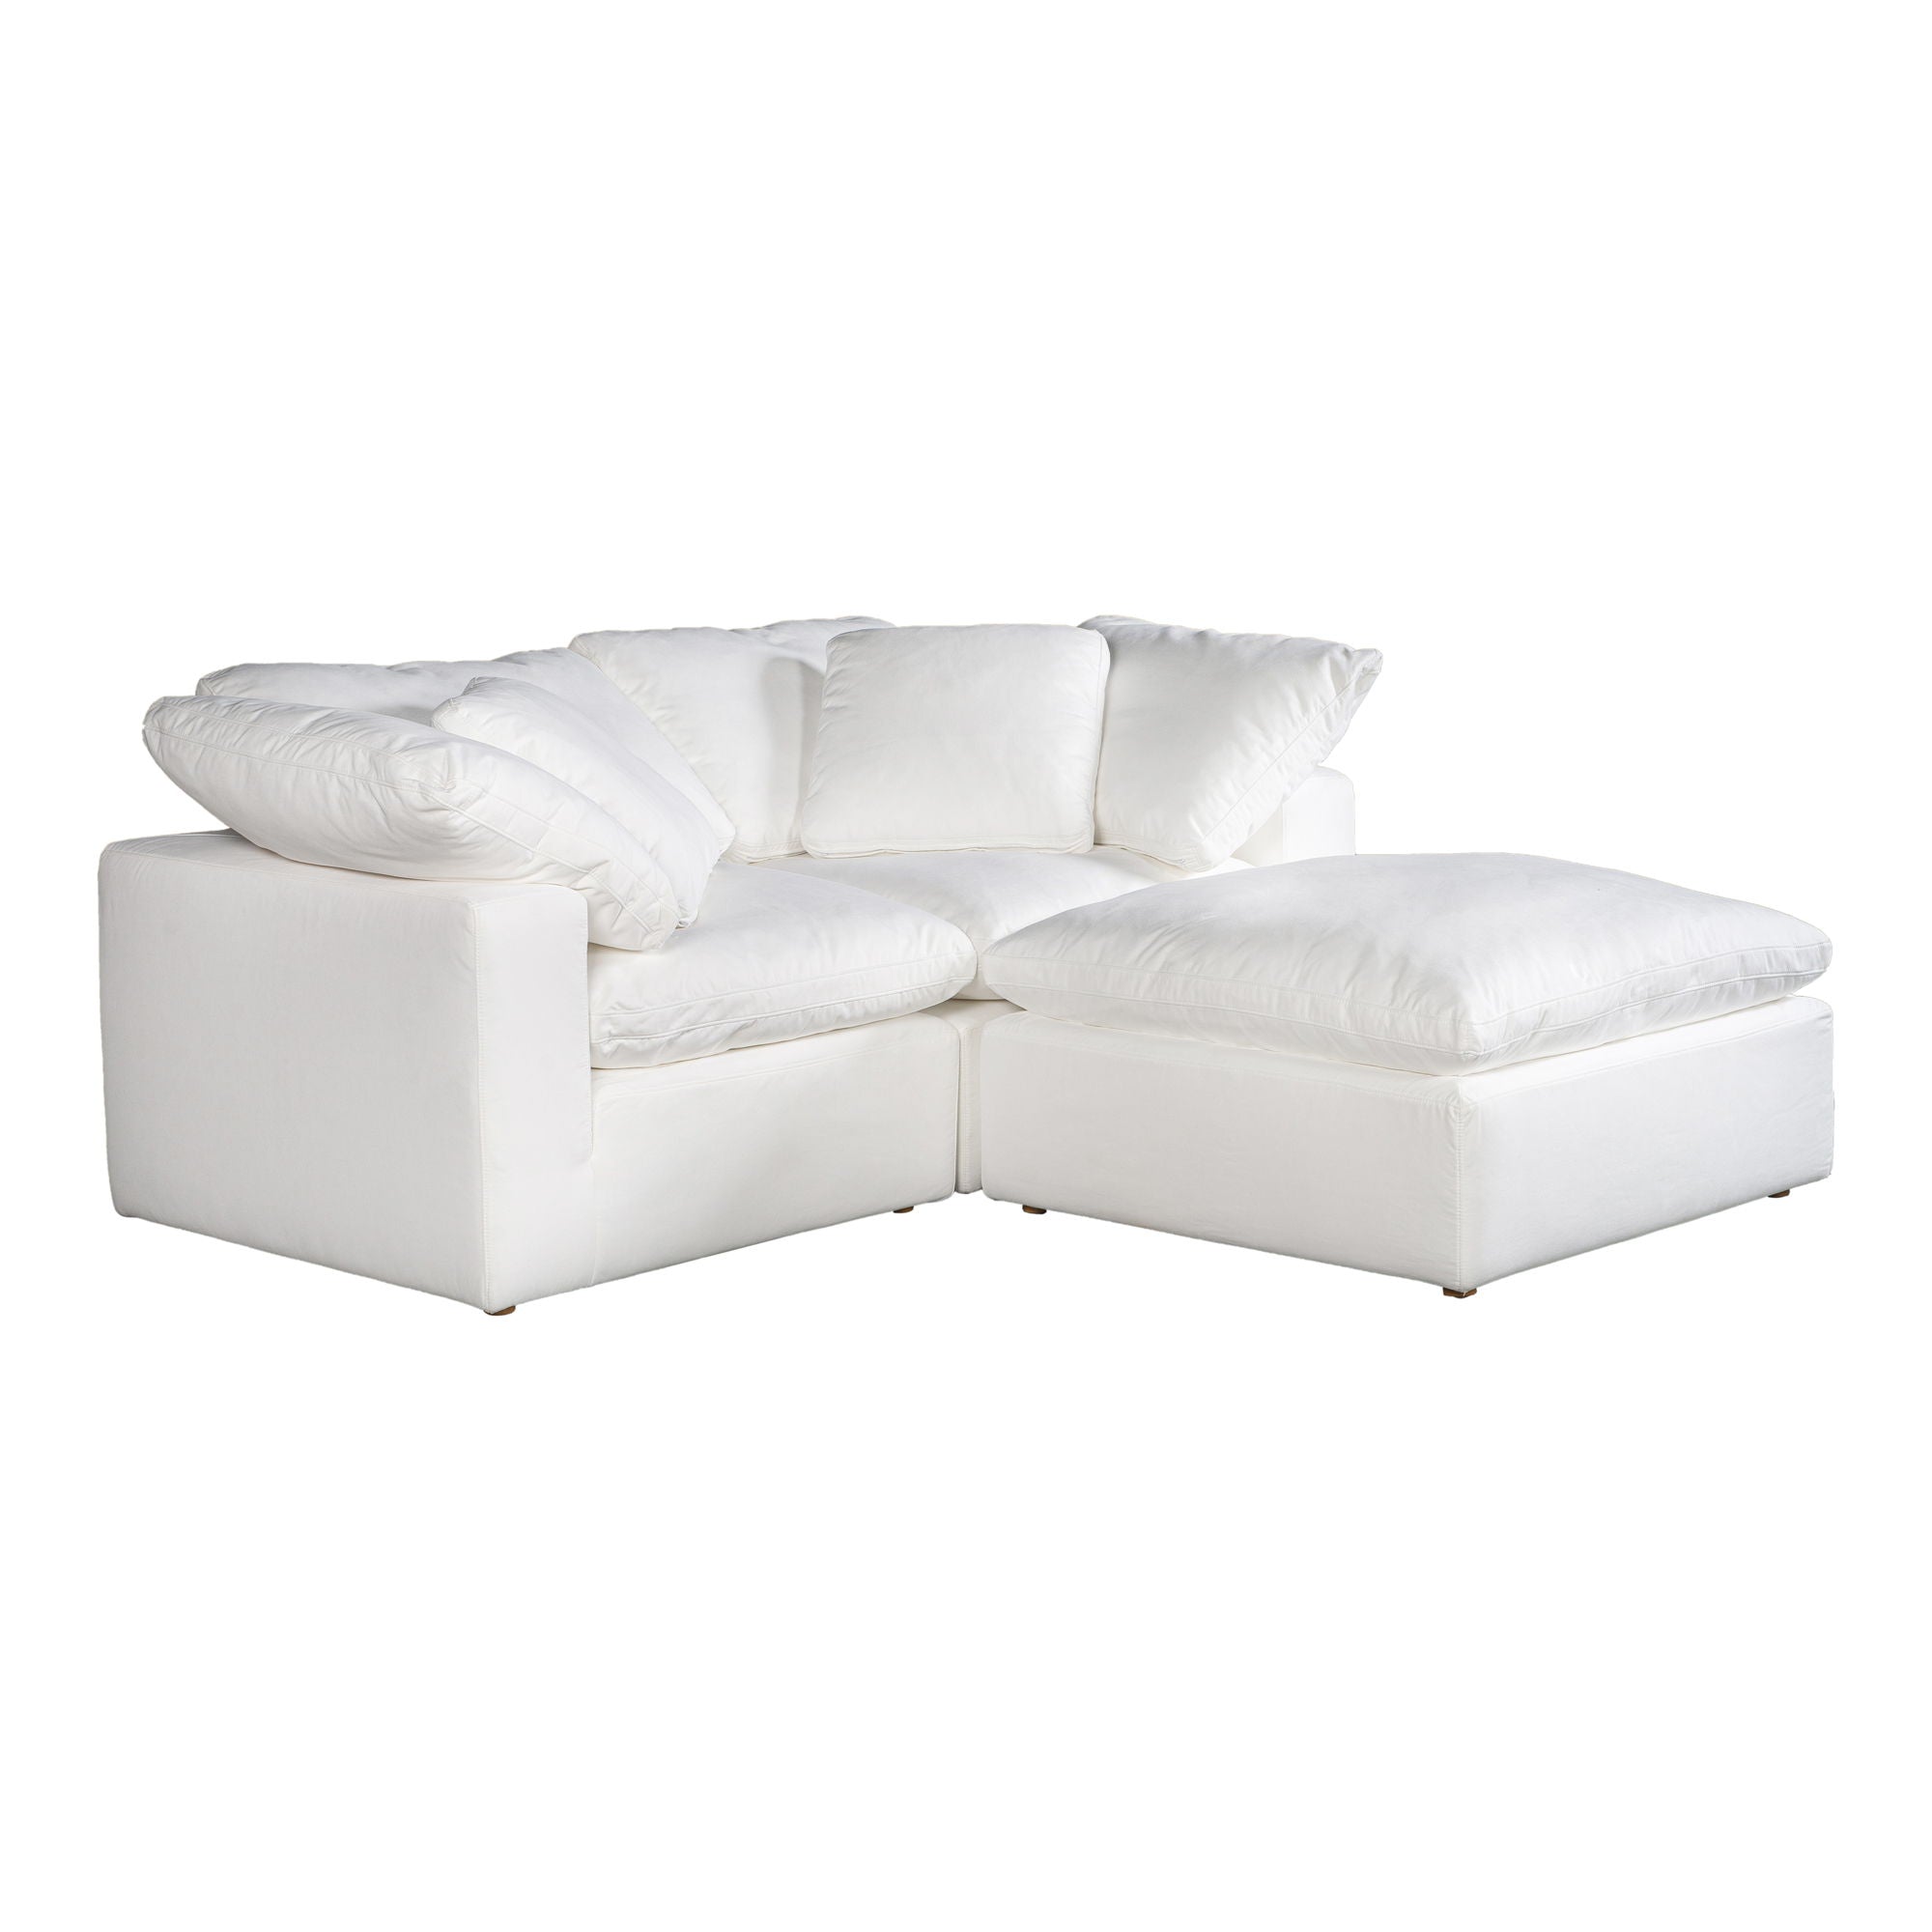 Terra Condo Modular Sectional Cream Livesmart Fabric-Stationary Sectionals-American Furniture Outlet